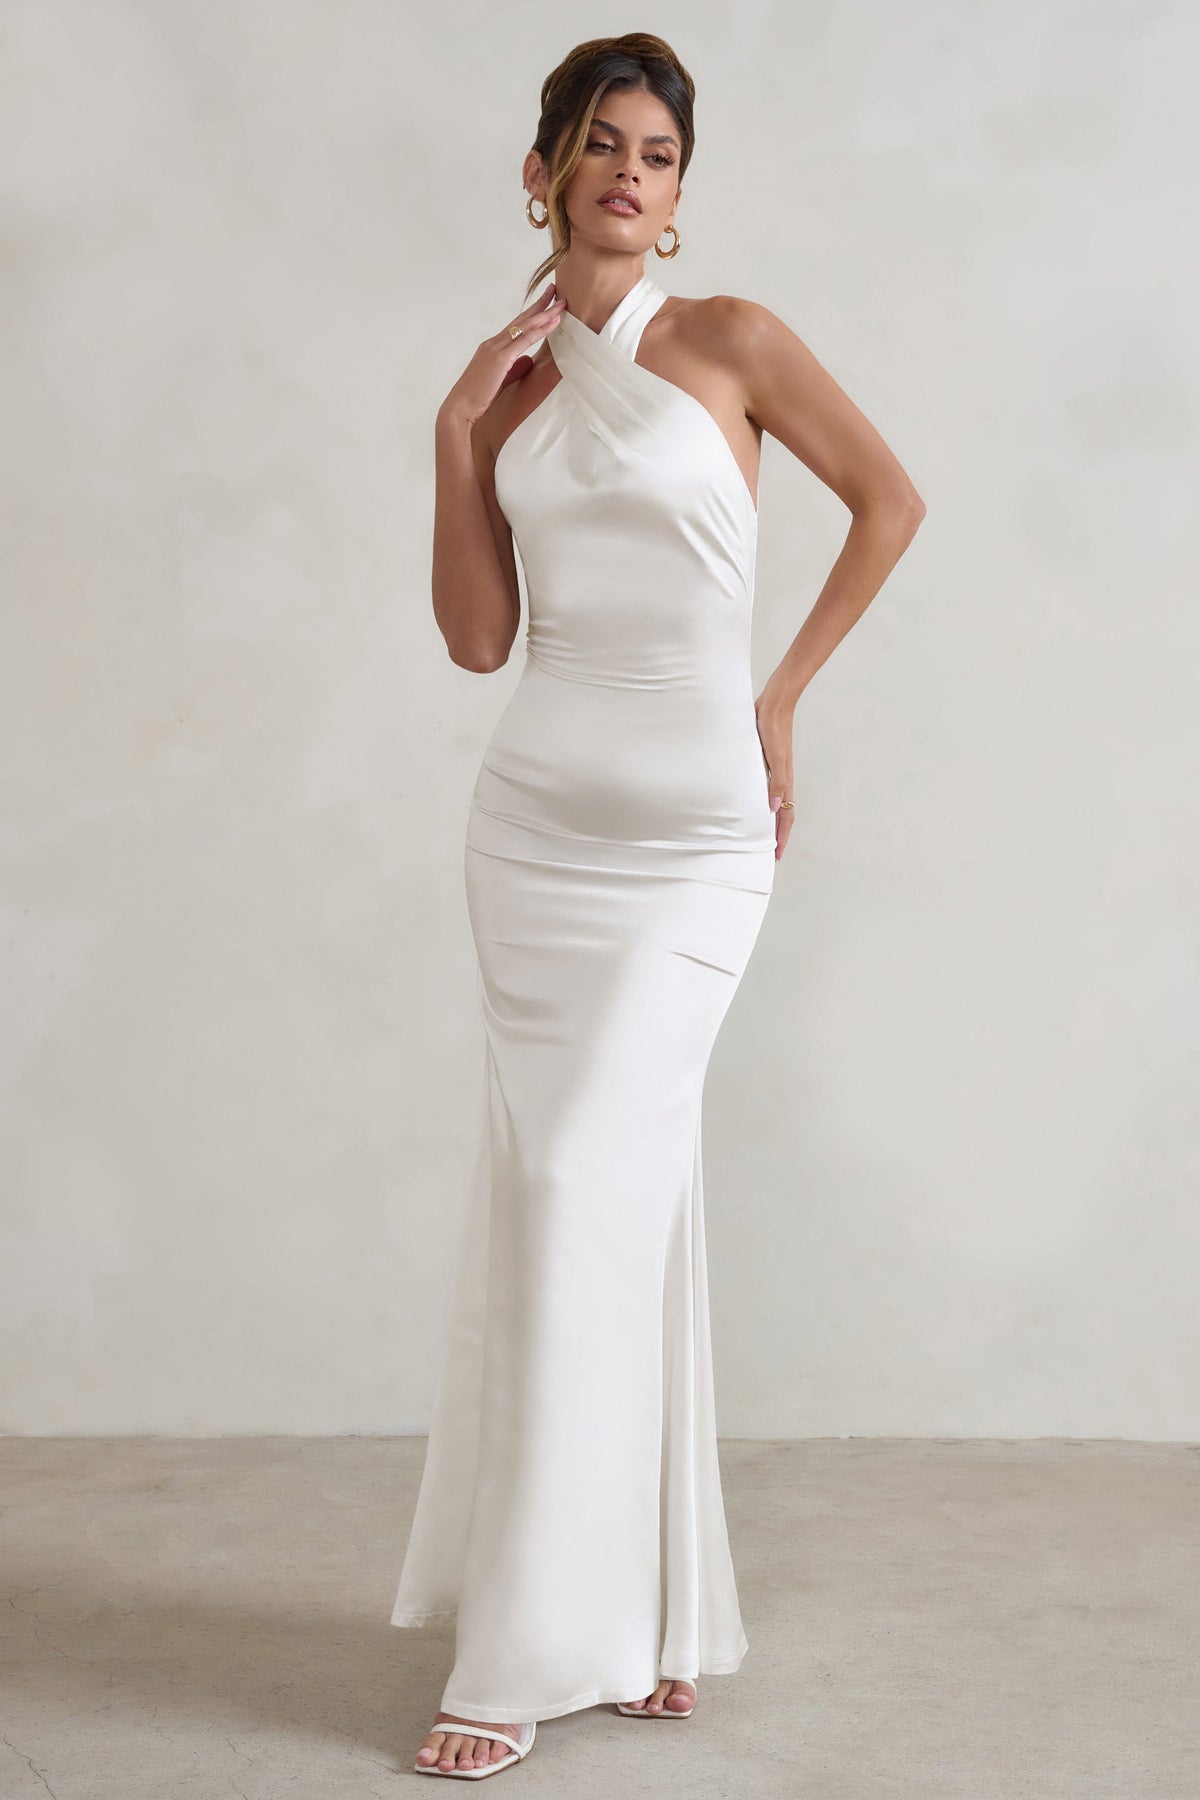 Evening One shoulder White Satin dress for women – The Ambition Collective